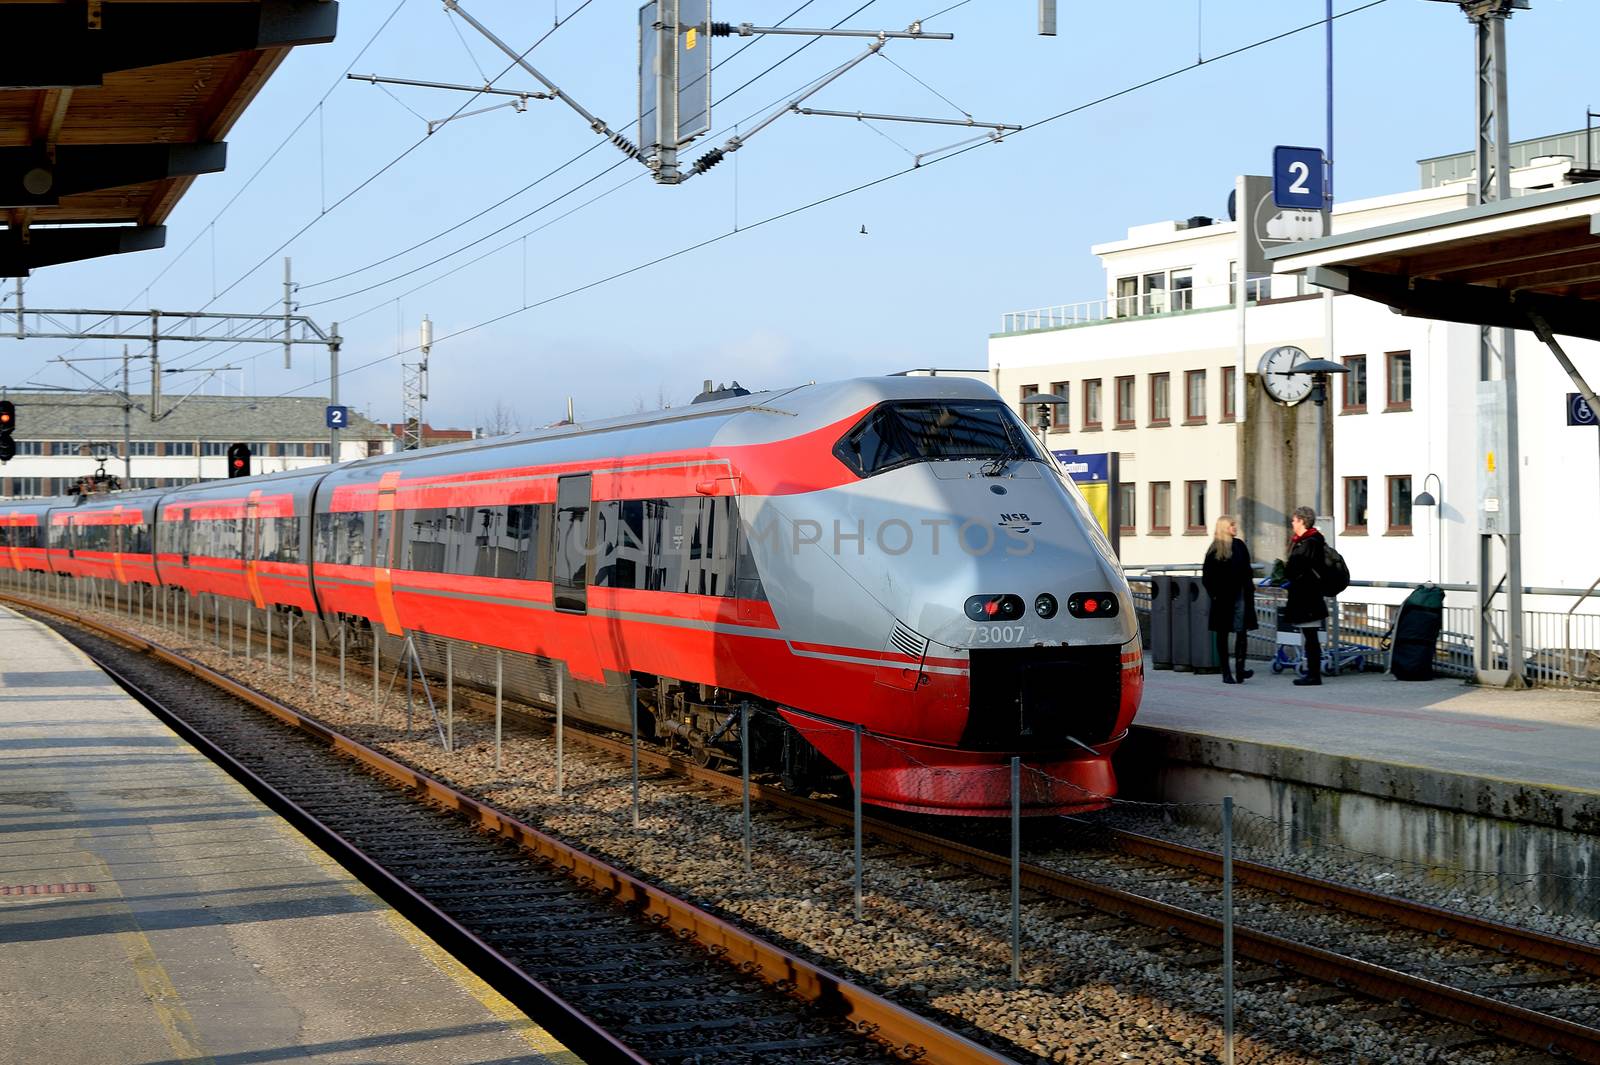 Oslo to Stavanger Train Pulling Into Sandnes Station by Whiteboxmedia